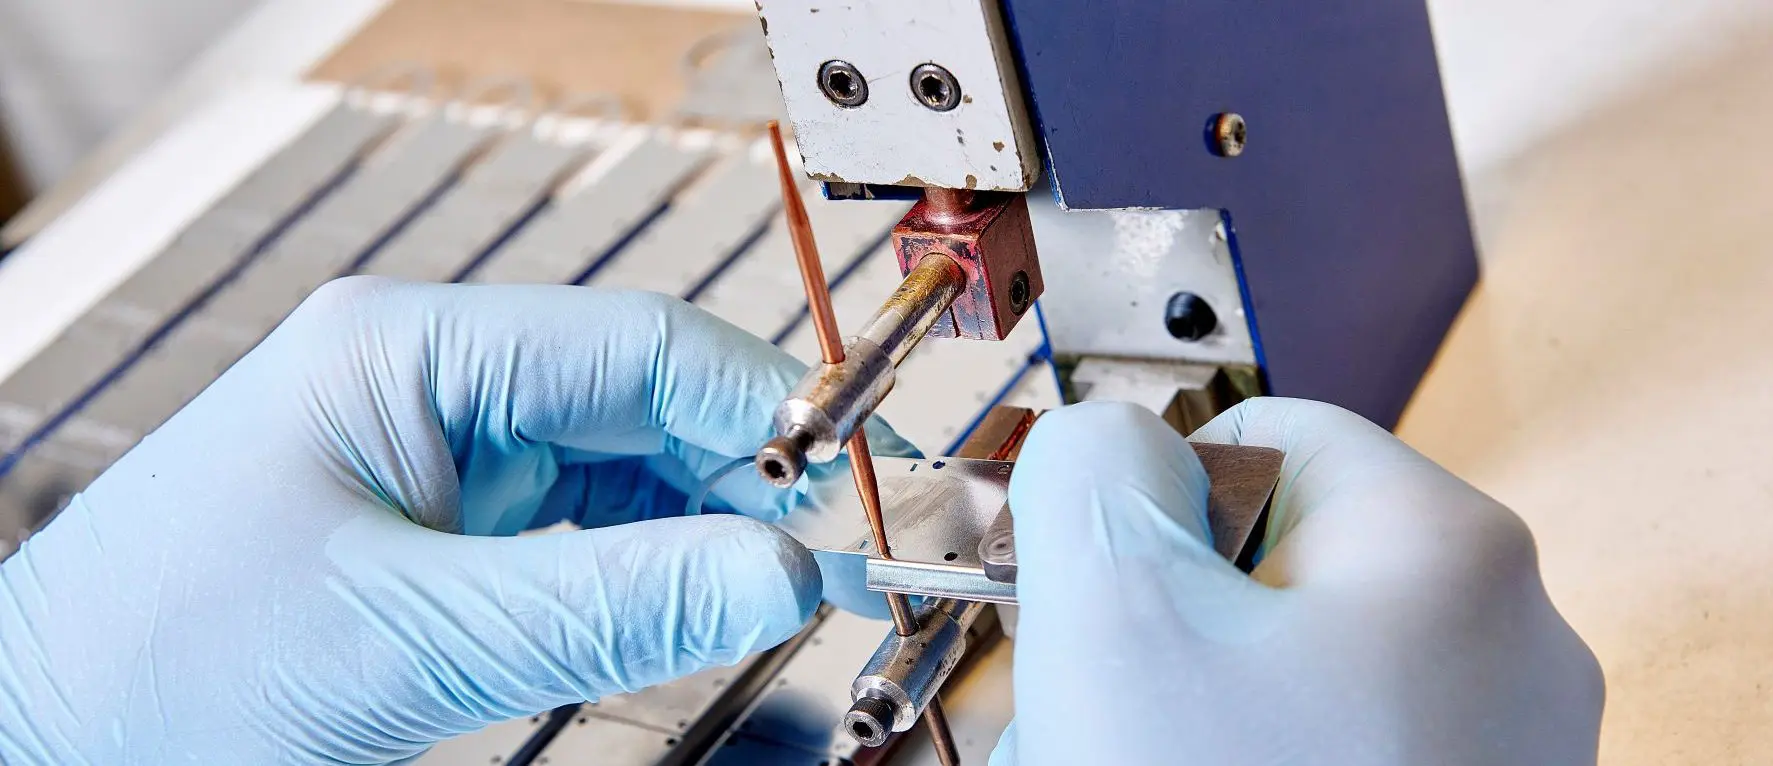 Spot-Welding Solutions For Components